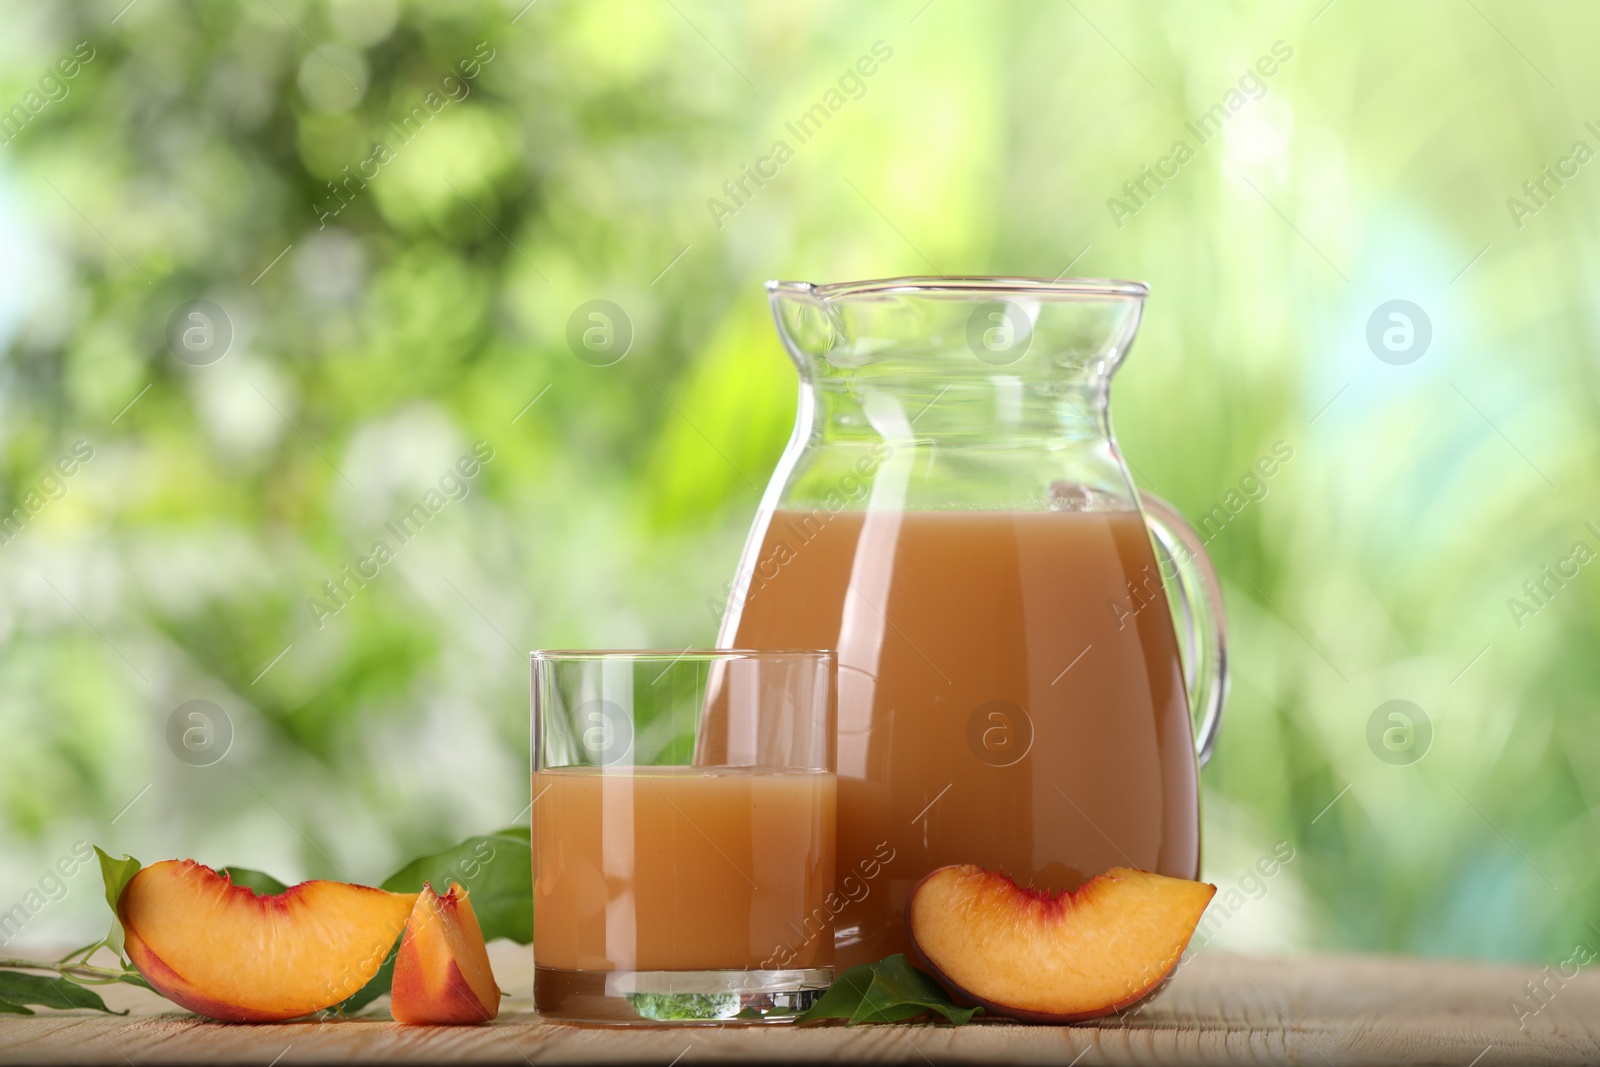 Photo of Tasty peach juice and fresh fruit on wooden table outdoors